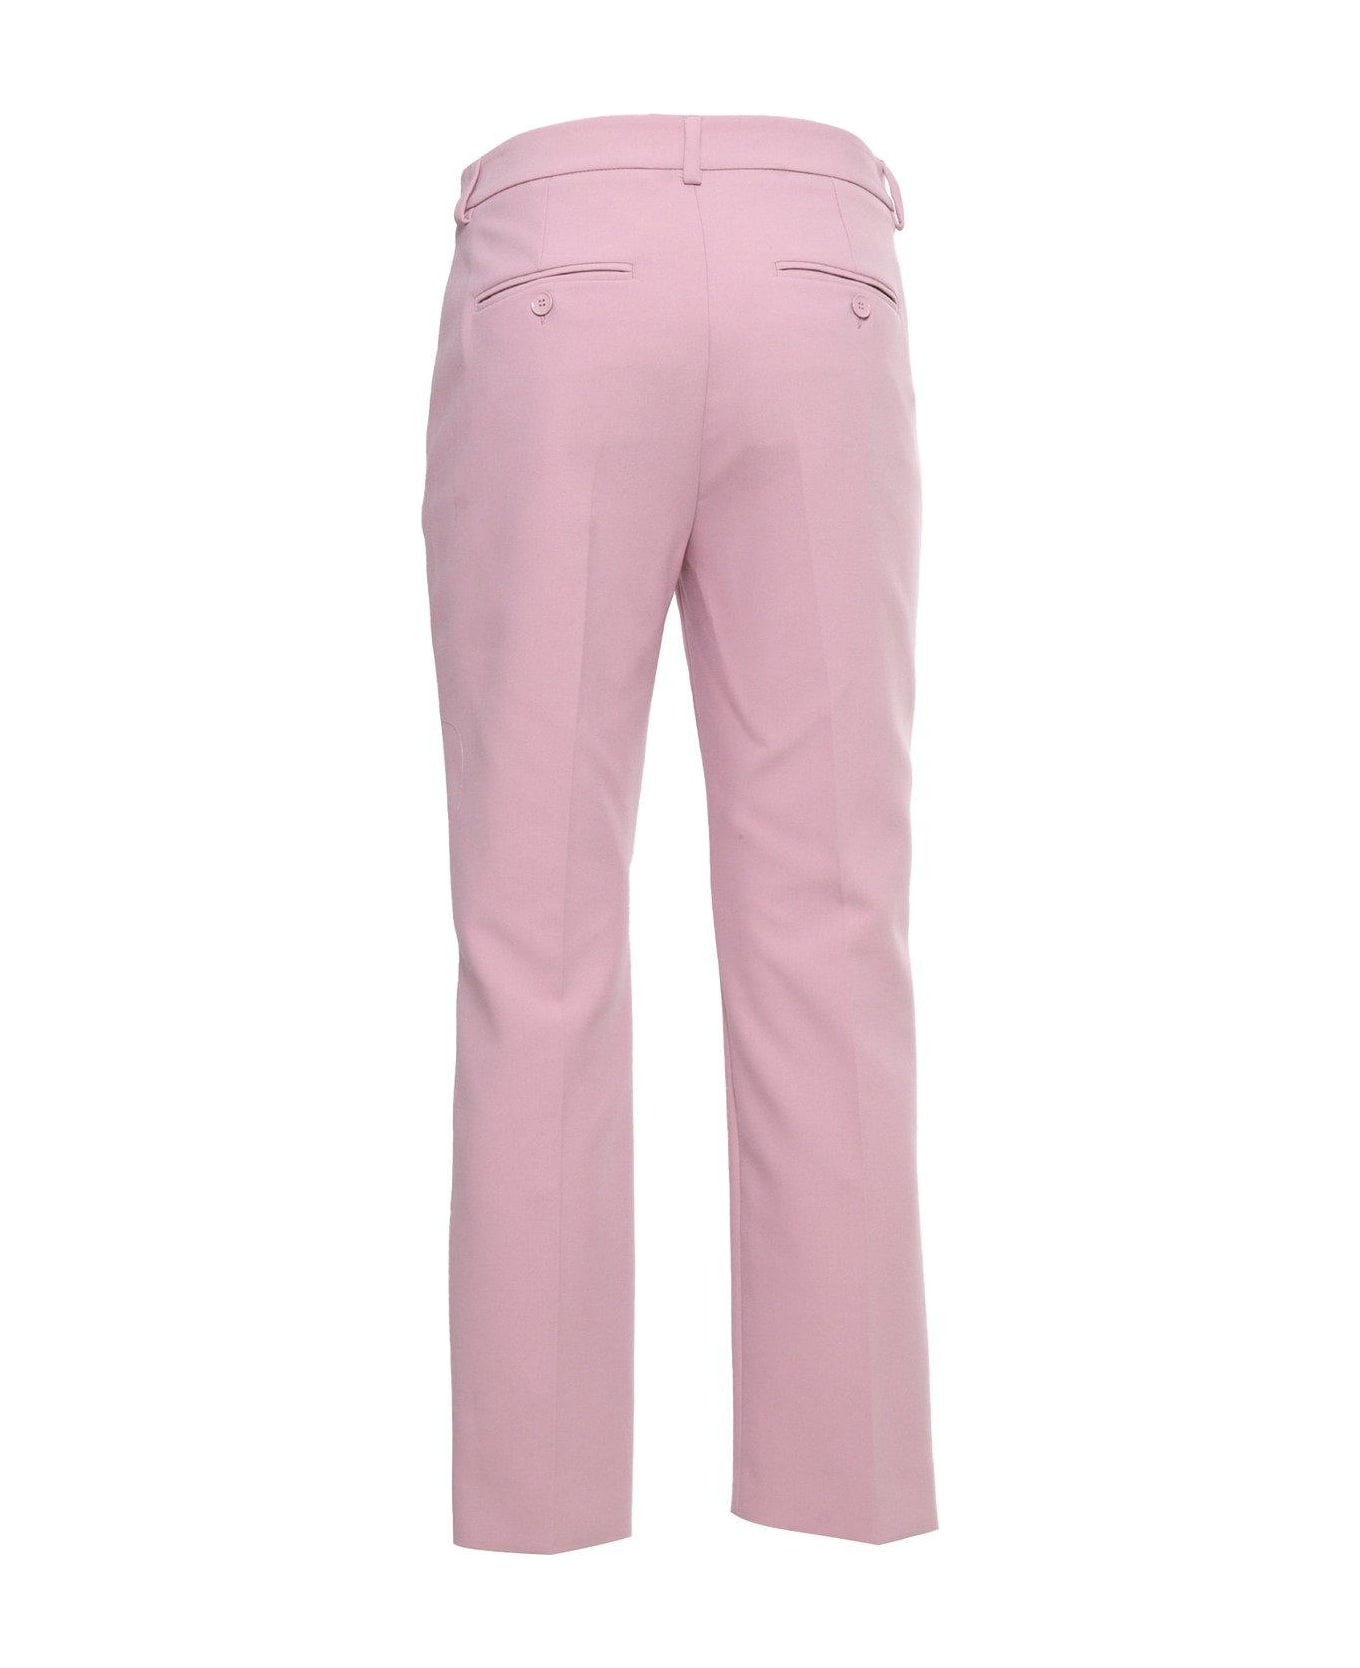 Weekend Max Mara Straight Fit Cropped Trousers - PINK ボトムス